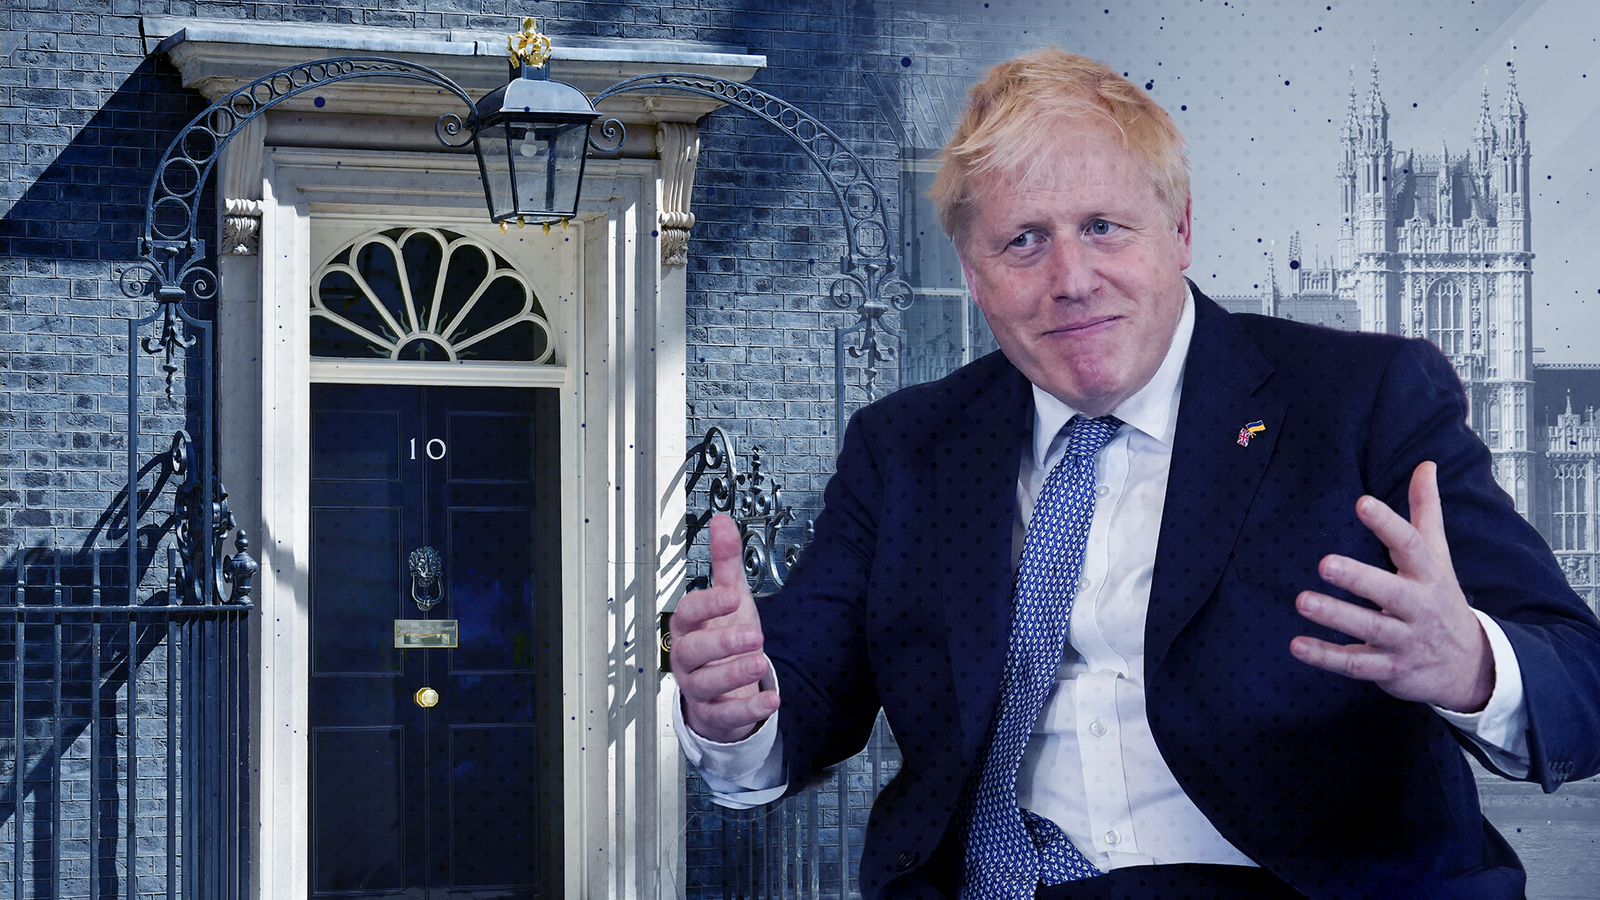 Partygate inquiry unlikely to drive stake through the heart of Boris Johnson's political career